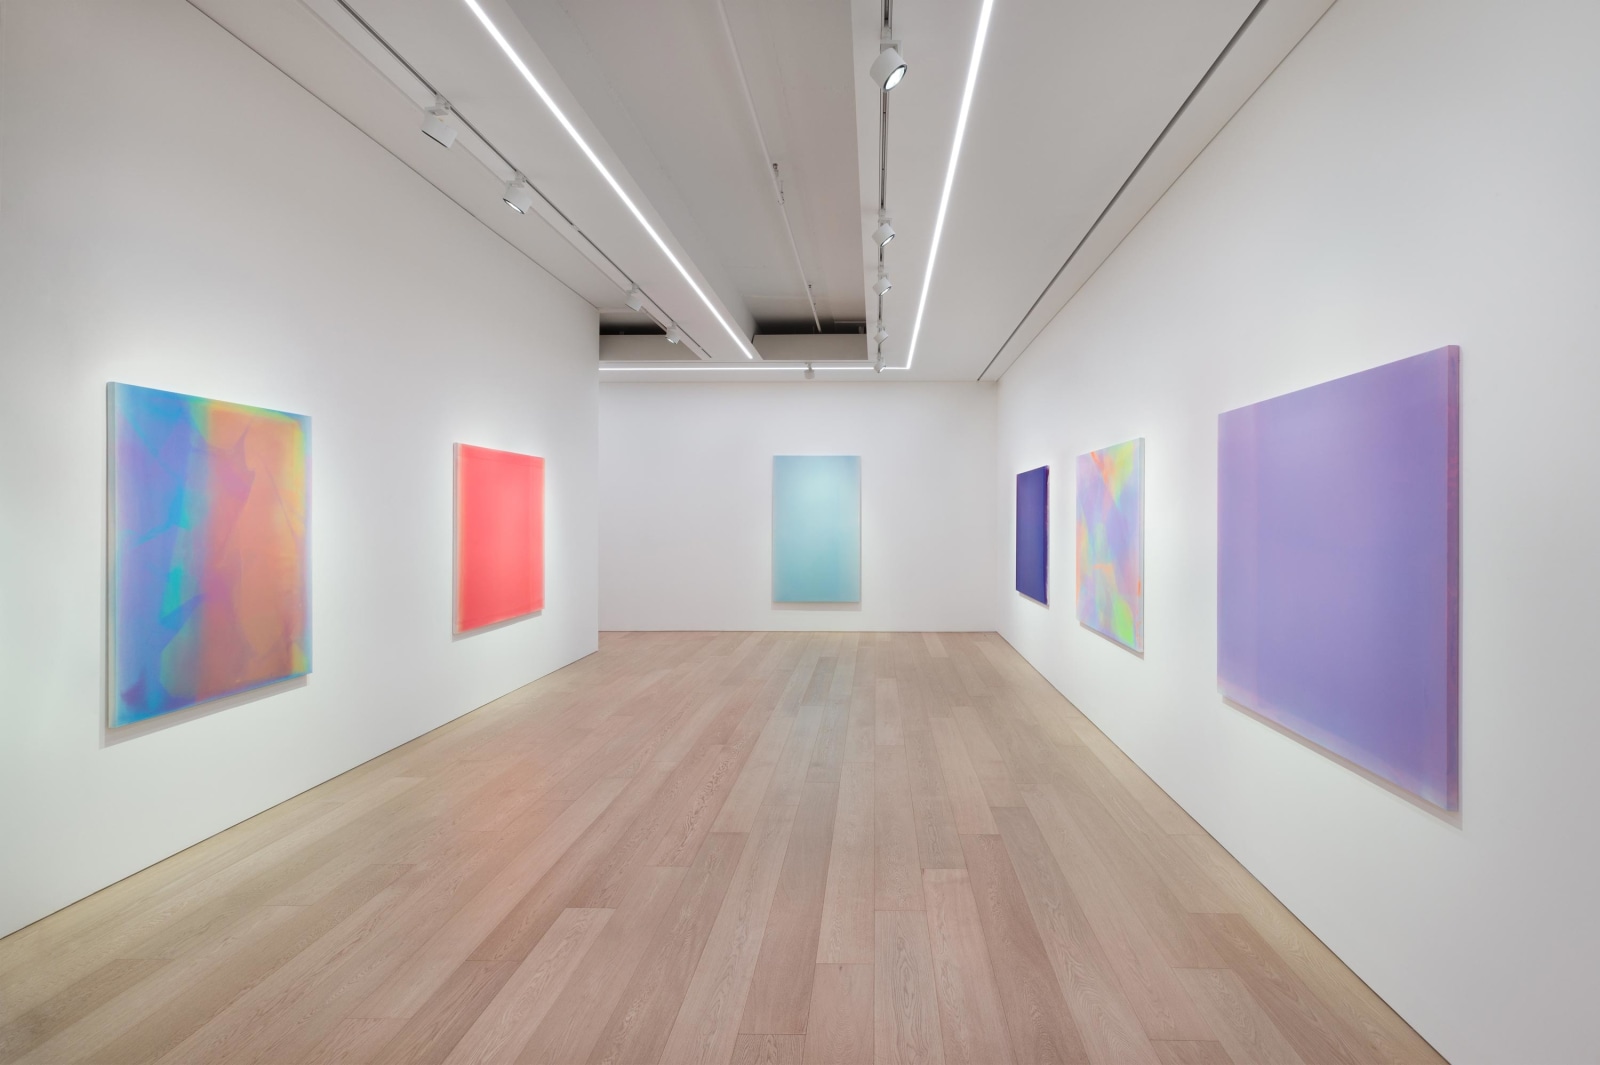 Reflections and Refractions: Helen Pashgian and Kim Taek Sang, Installation View